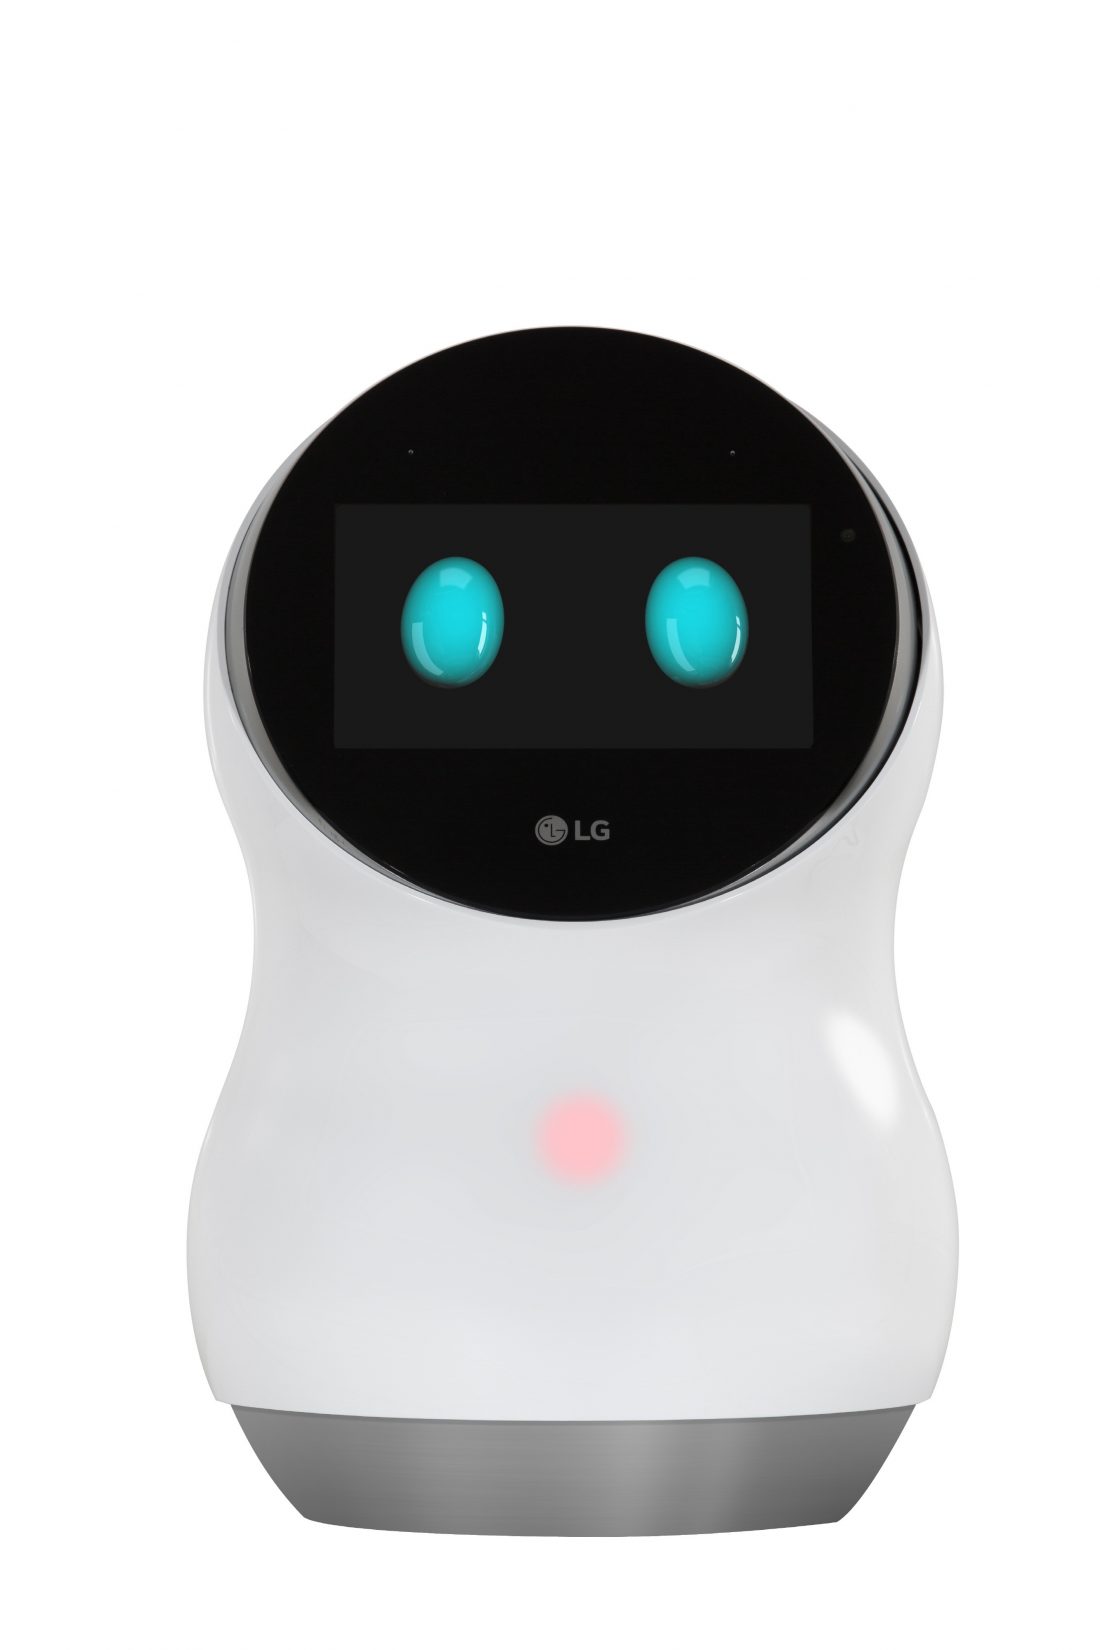 Front view of LG's CLOi home hub robot